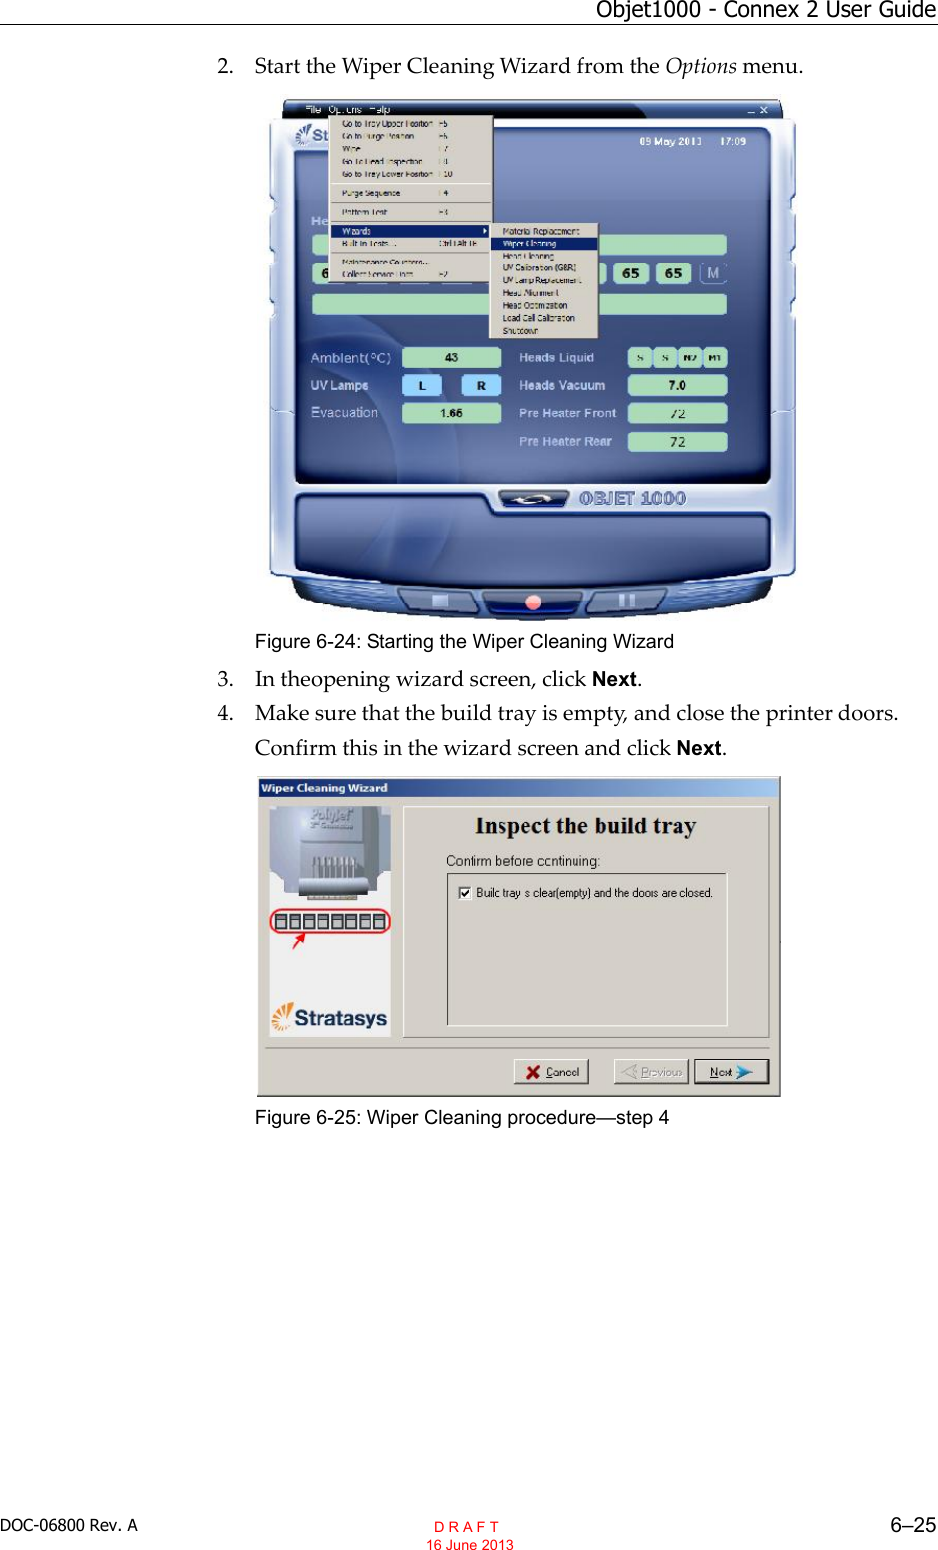 DOC-06800 Rev. A 6–25Objet1000 - Connex 2 User Guide2. Start the Wiper Cleaning Wizard from the Options menu.Figure 6-24: Starting the Wiper Cleaning Wizard3. In theopening wizard screen, click Next.4. Make sure that the build tray is empty, and close the printer doors.Confirm this in the wizard screen and click Next.Figure 6-25: Wiper Cleaning procedure—step 4  D R A F T 16 June 2013